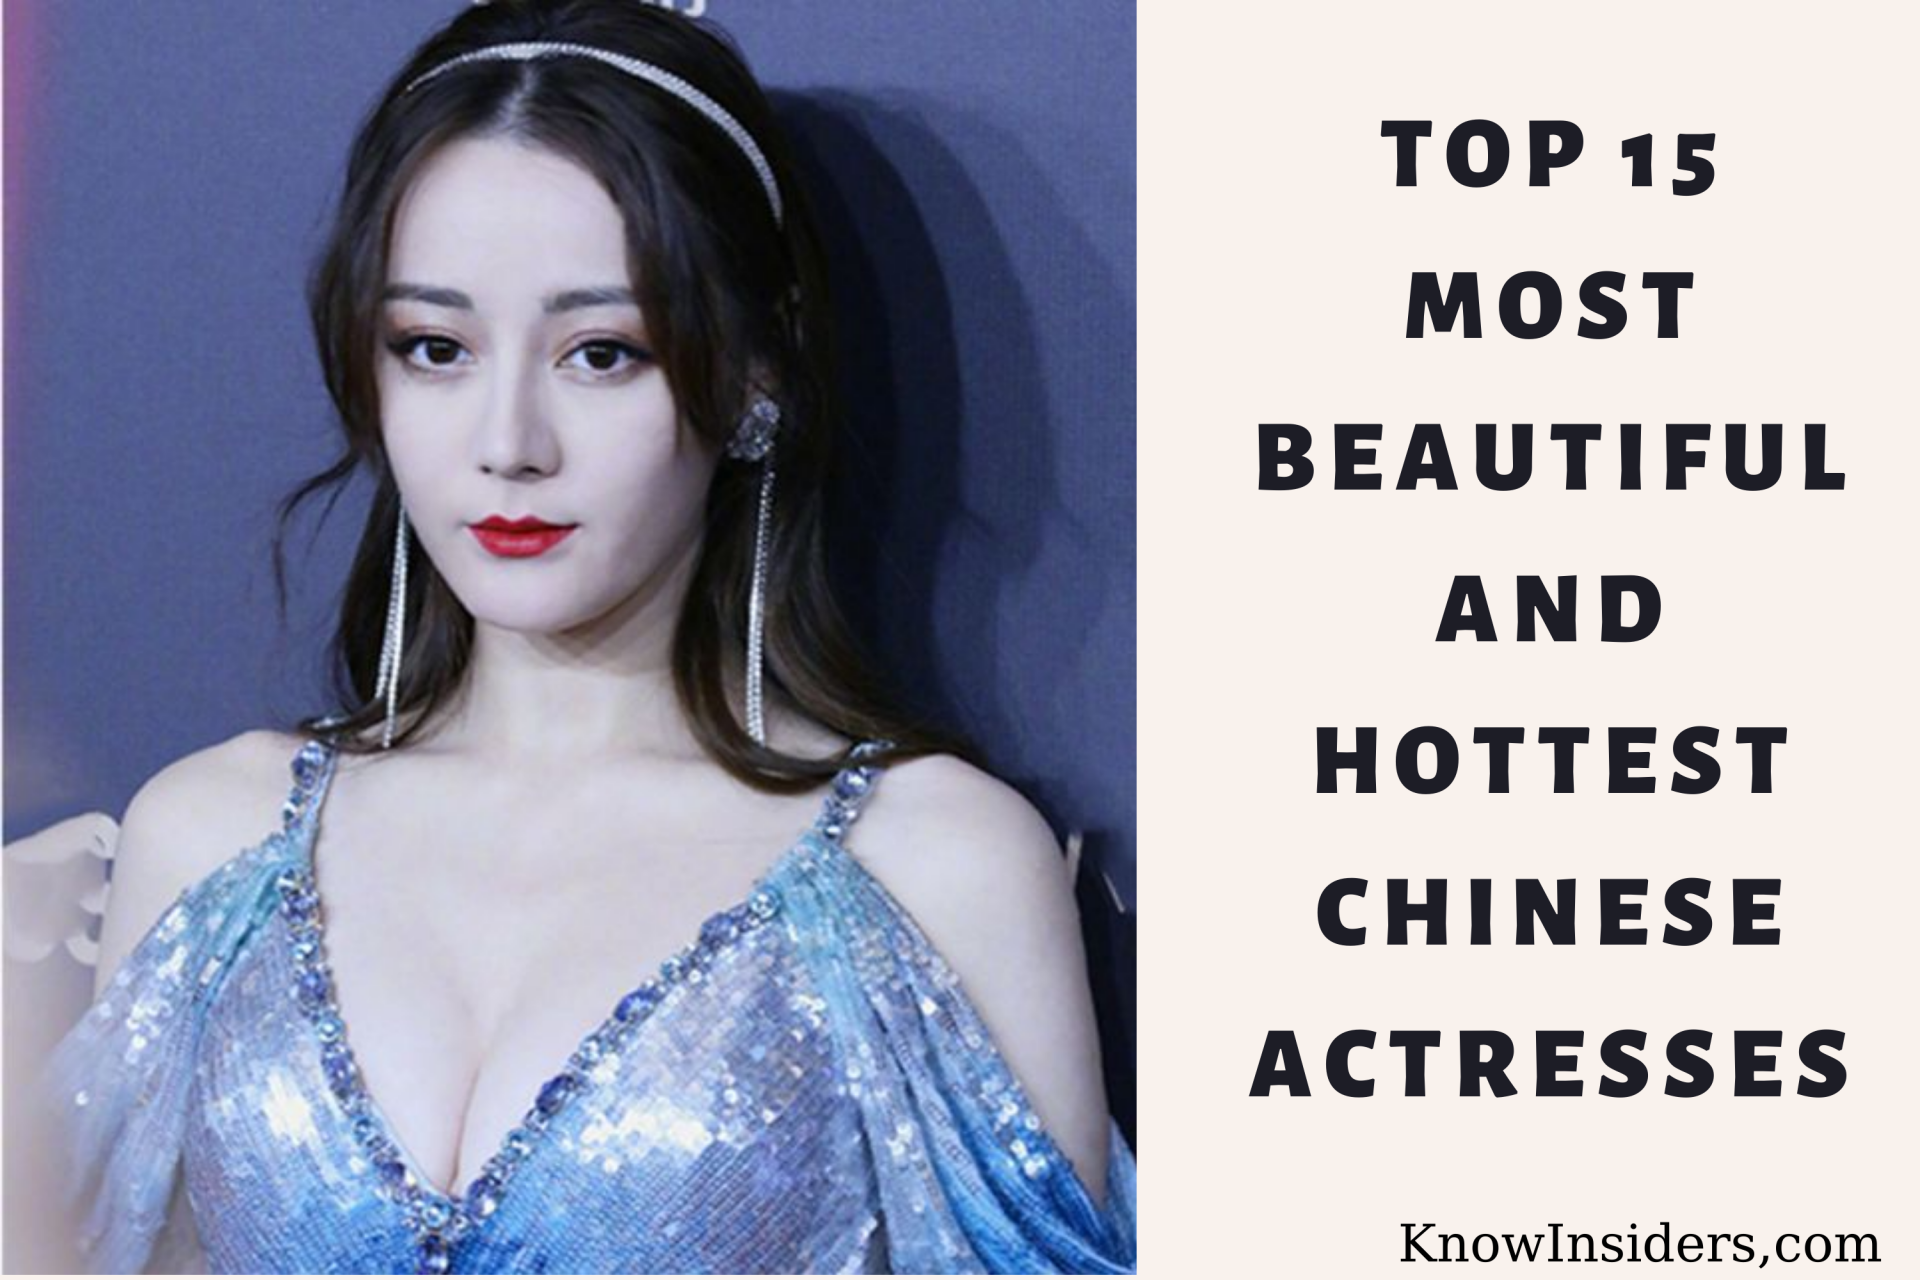 Top 15 Most Beautiful Chinese Actresses In the World